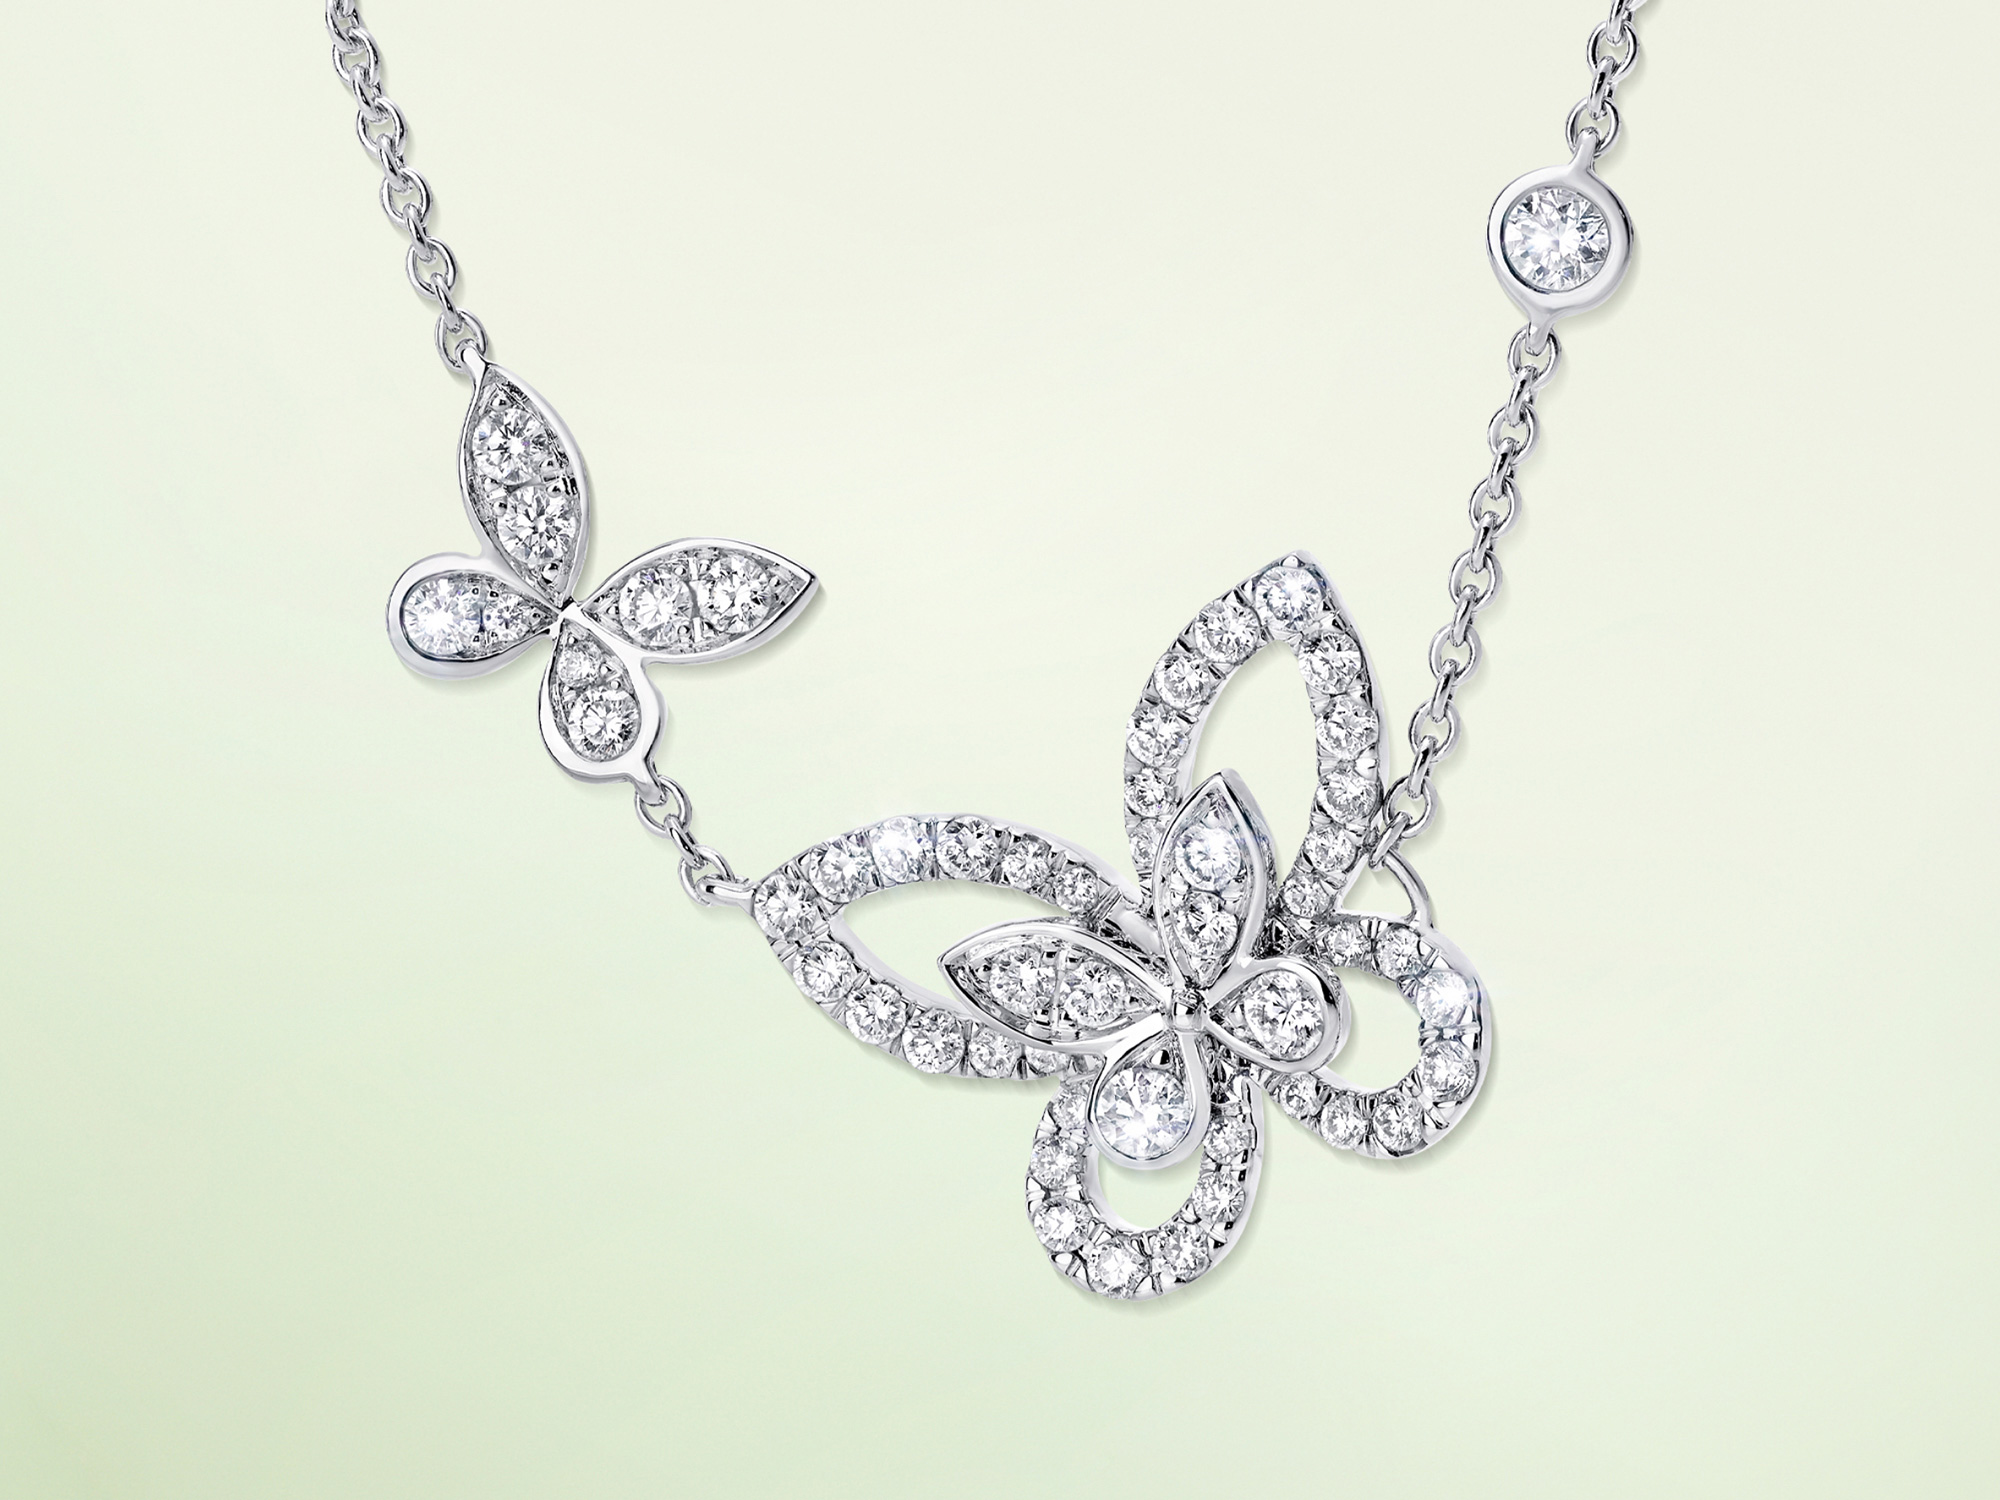 Double Butterfly Silhouette Diamond Pendant from the Graff jewellery collection